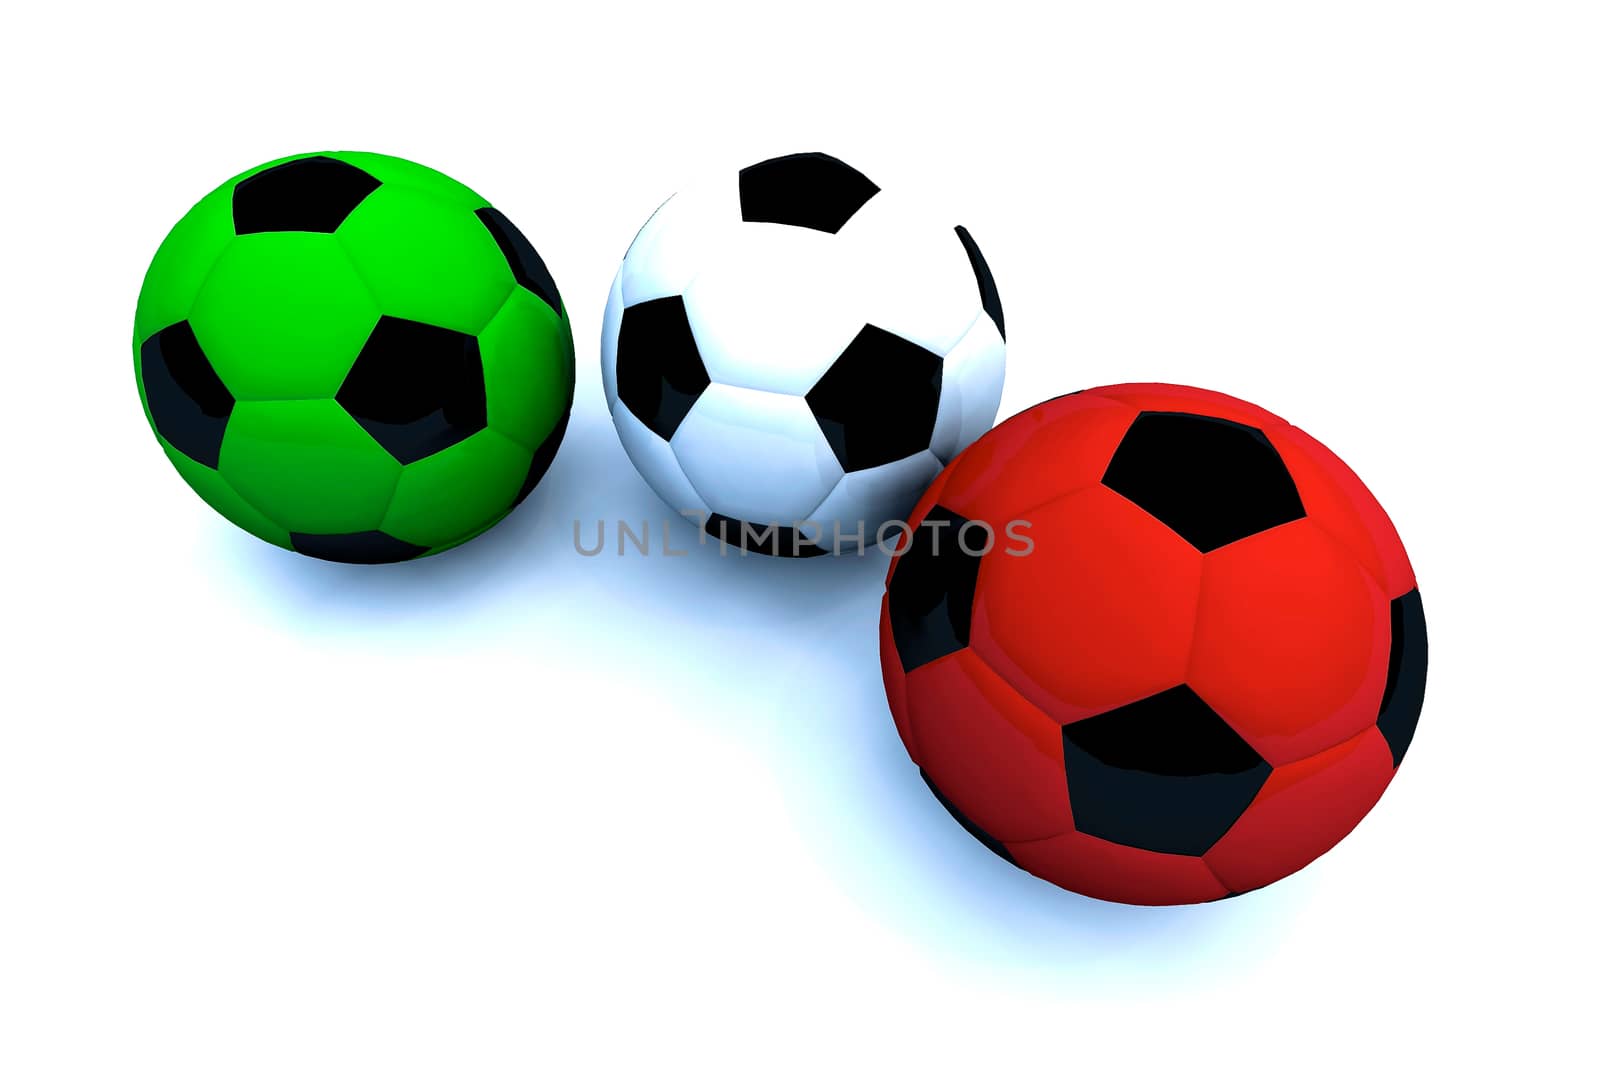 Green, white and red soccer balls